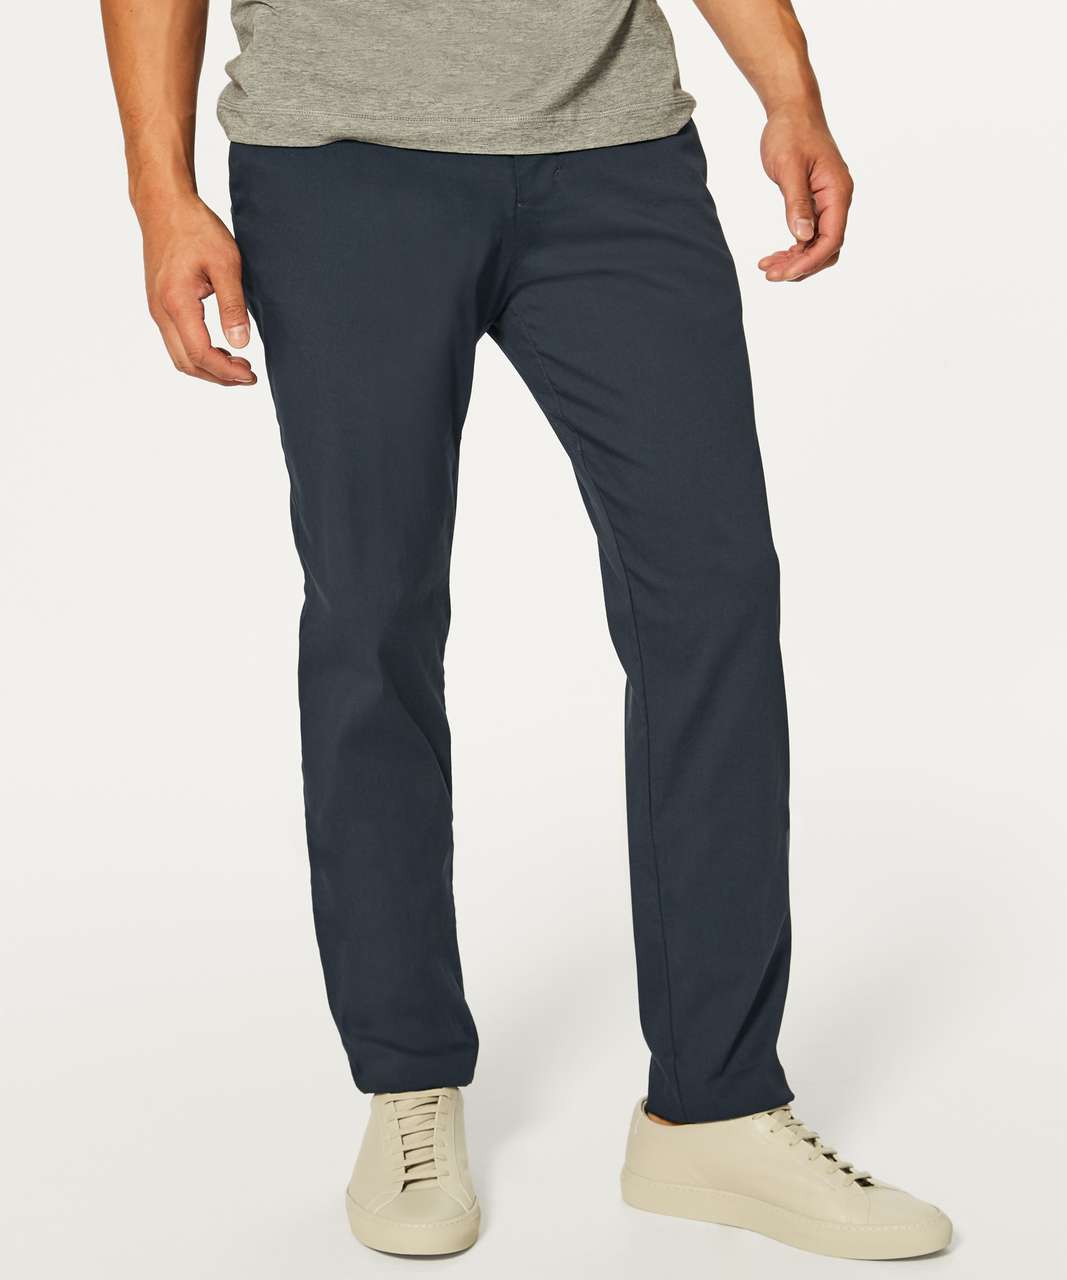 Hopefully everyone gets a laugh like I did. Commission Pant Slim Fit 28”  34. I've already swapped and will update when the Classic Fit is delivered.  : r/lululemon